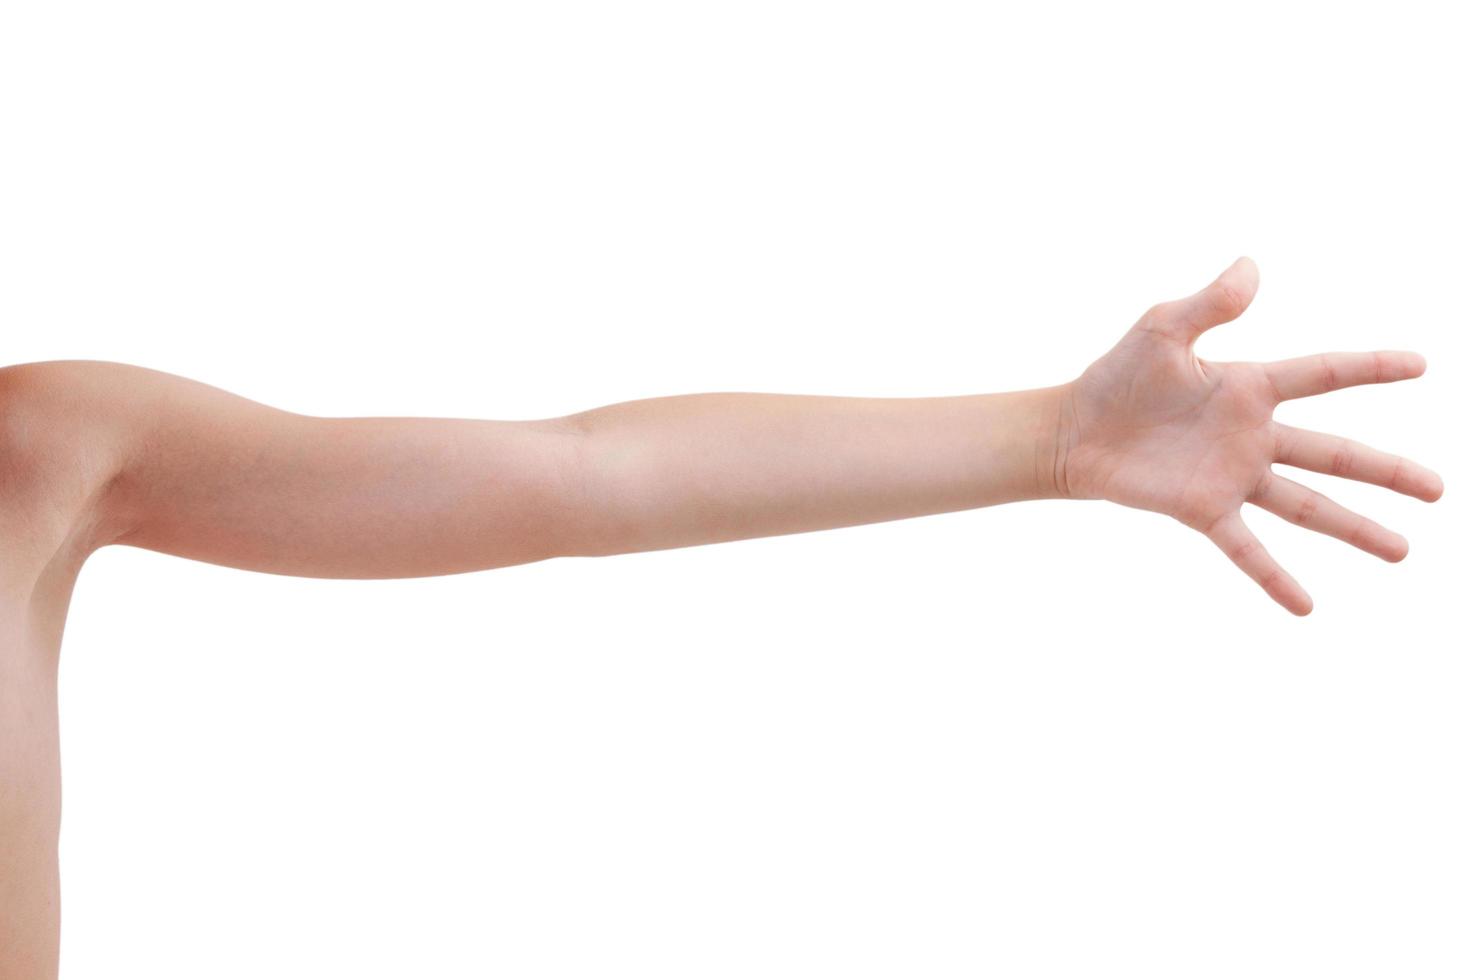 Stretched human hand photo